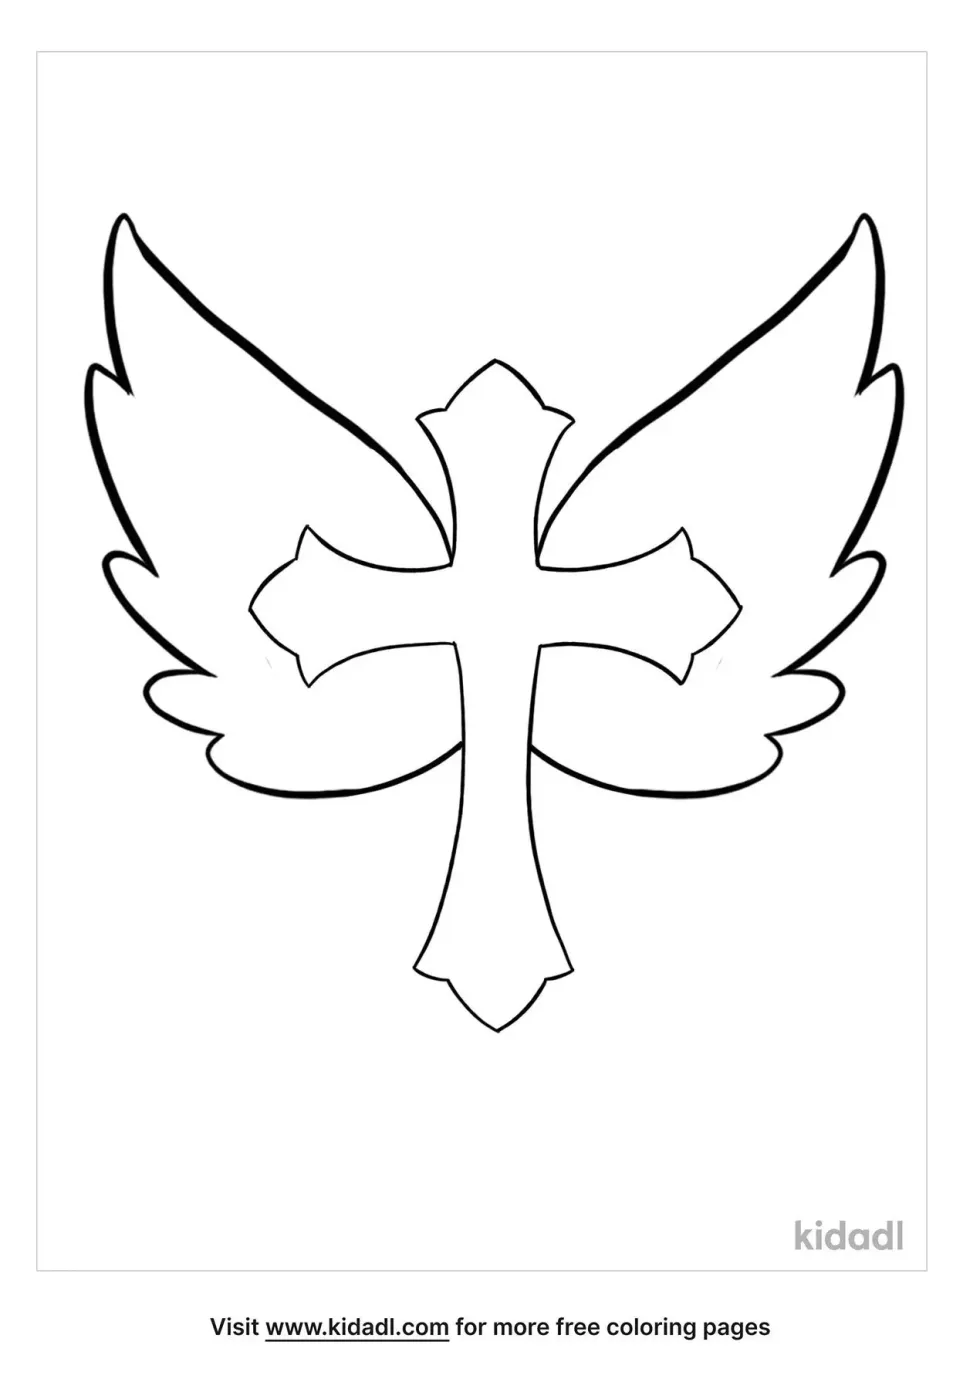 Crosses With Wings